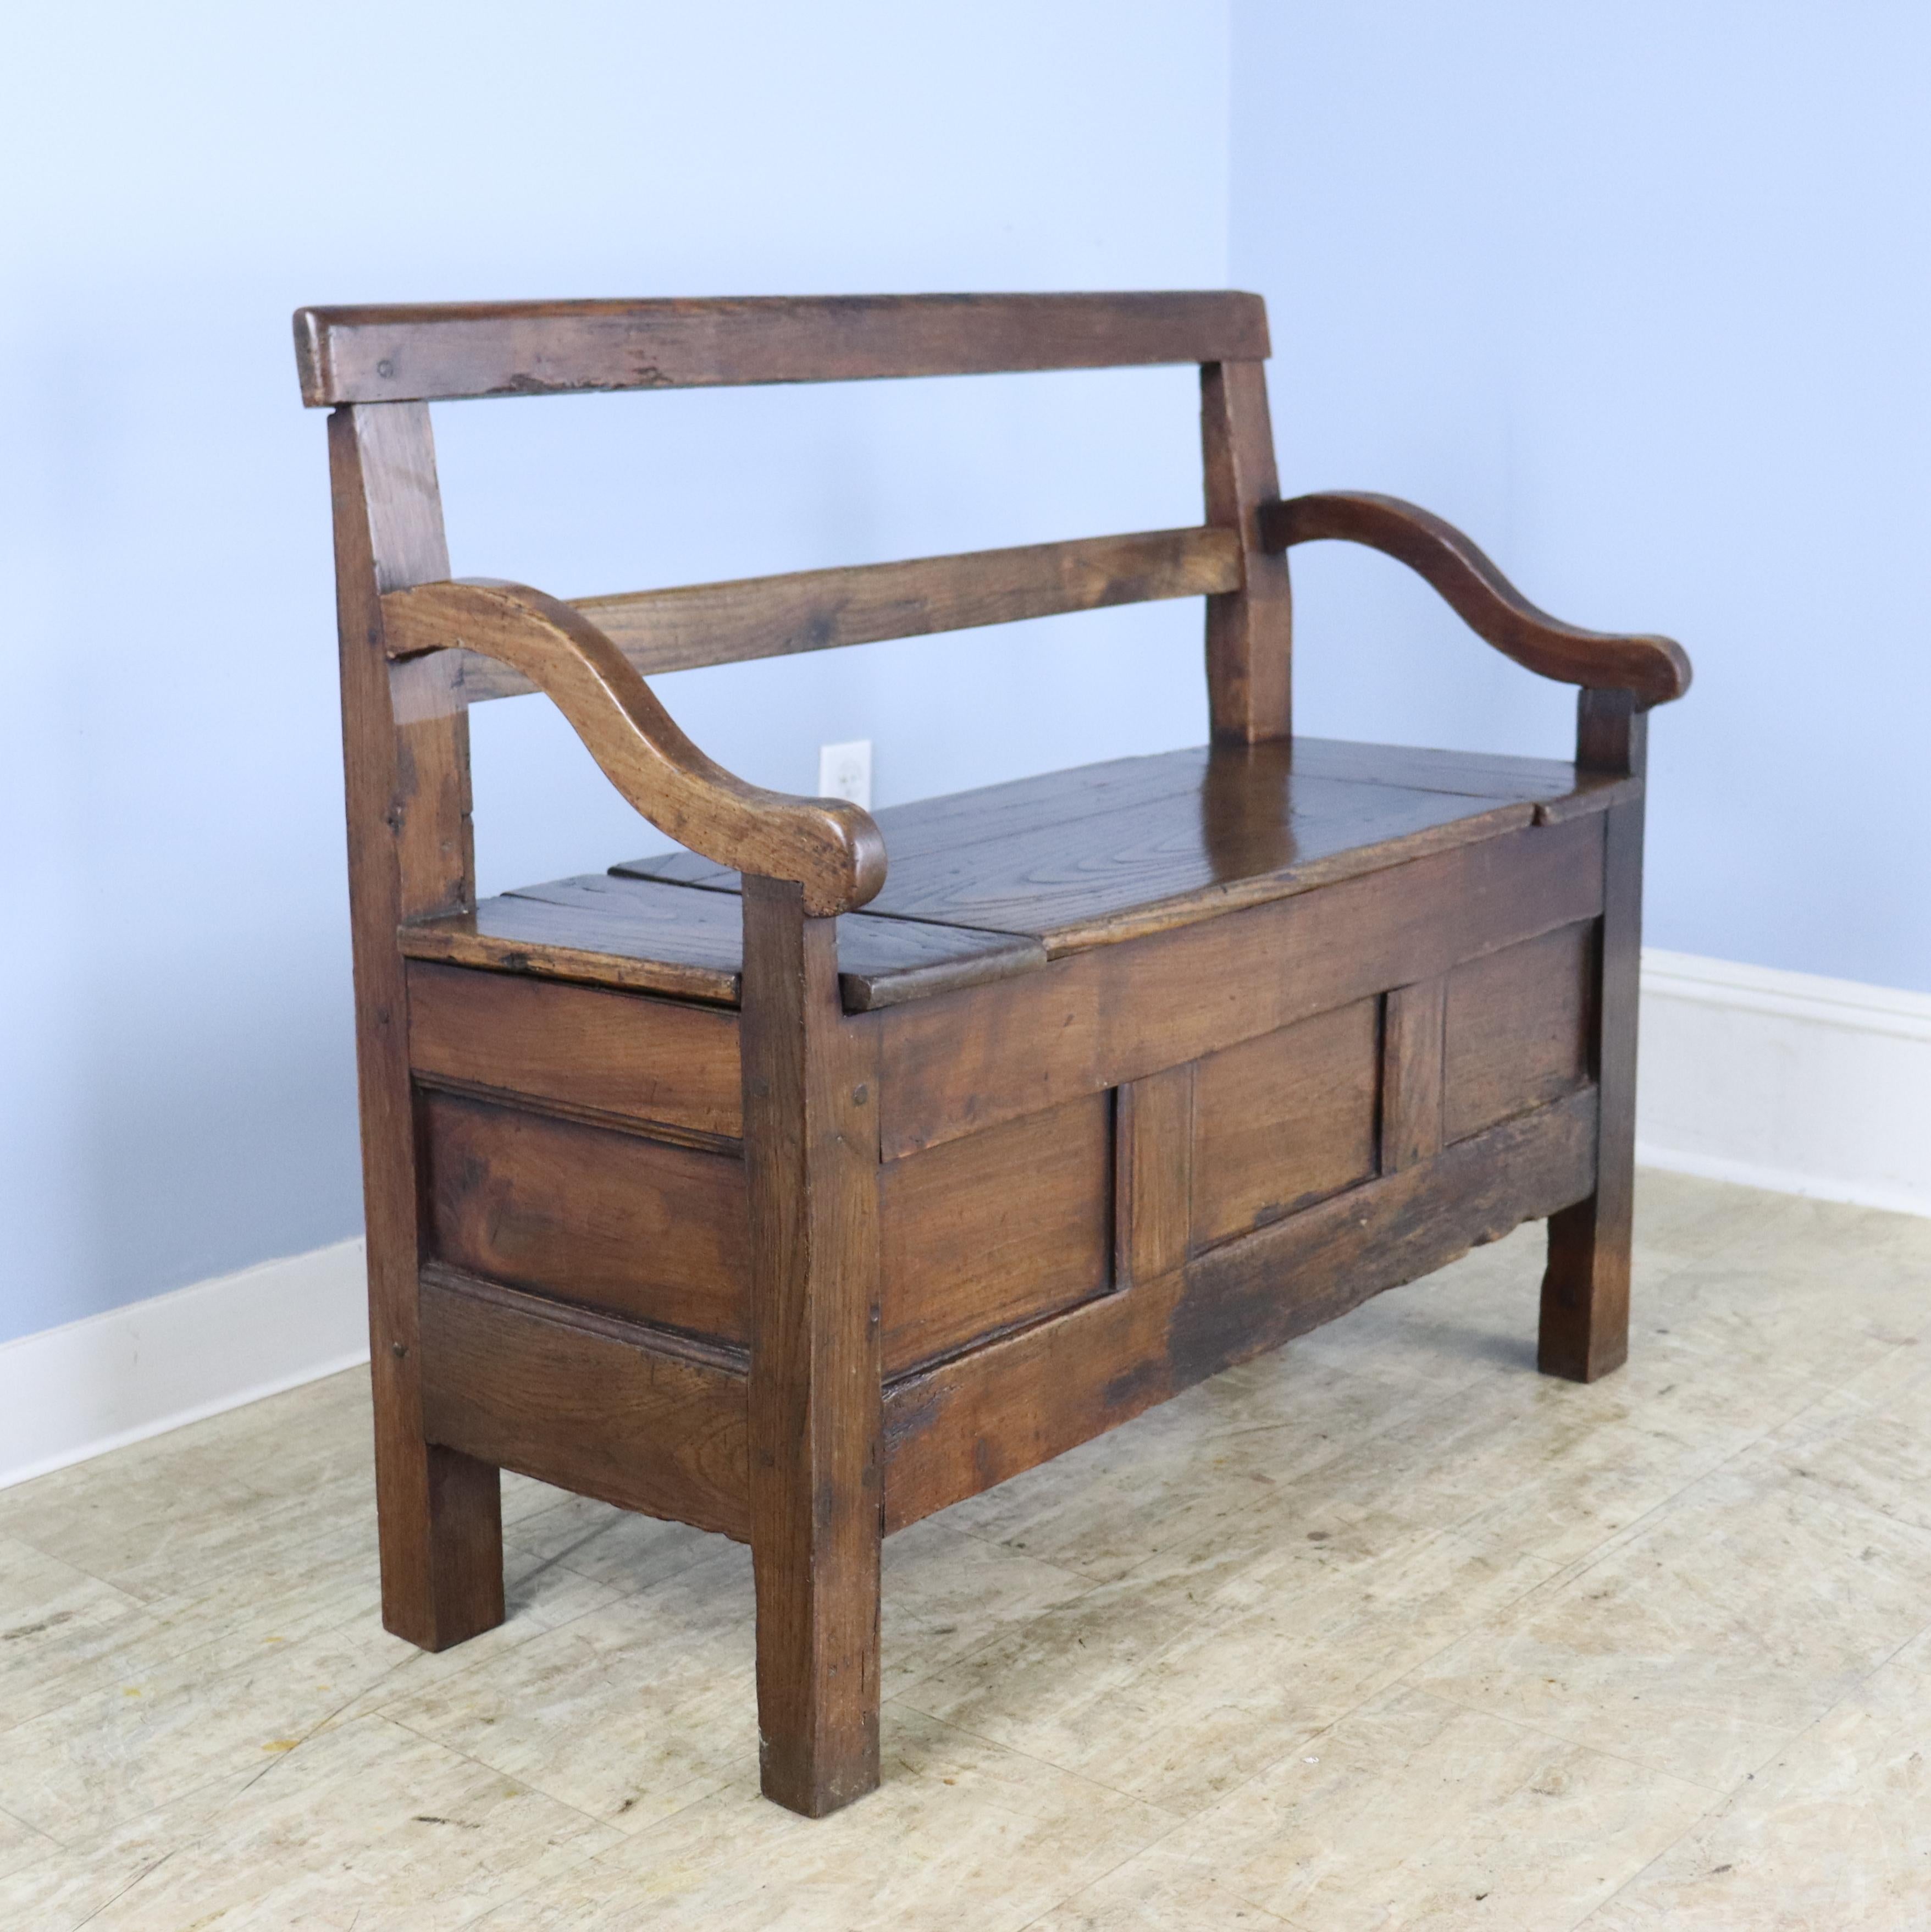 A handsome chunky chestnut bench with lots of good wear and a lift up seat with good storage.  Graceful curved arms. The interior of the storage compartment is quite clean.  There is some wear on the front of the piece, shown in thumbnails.